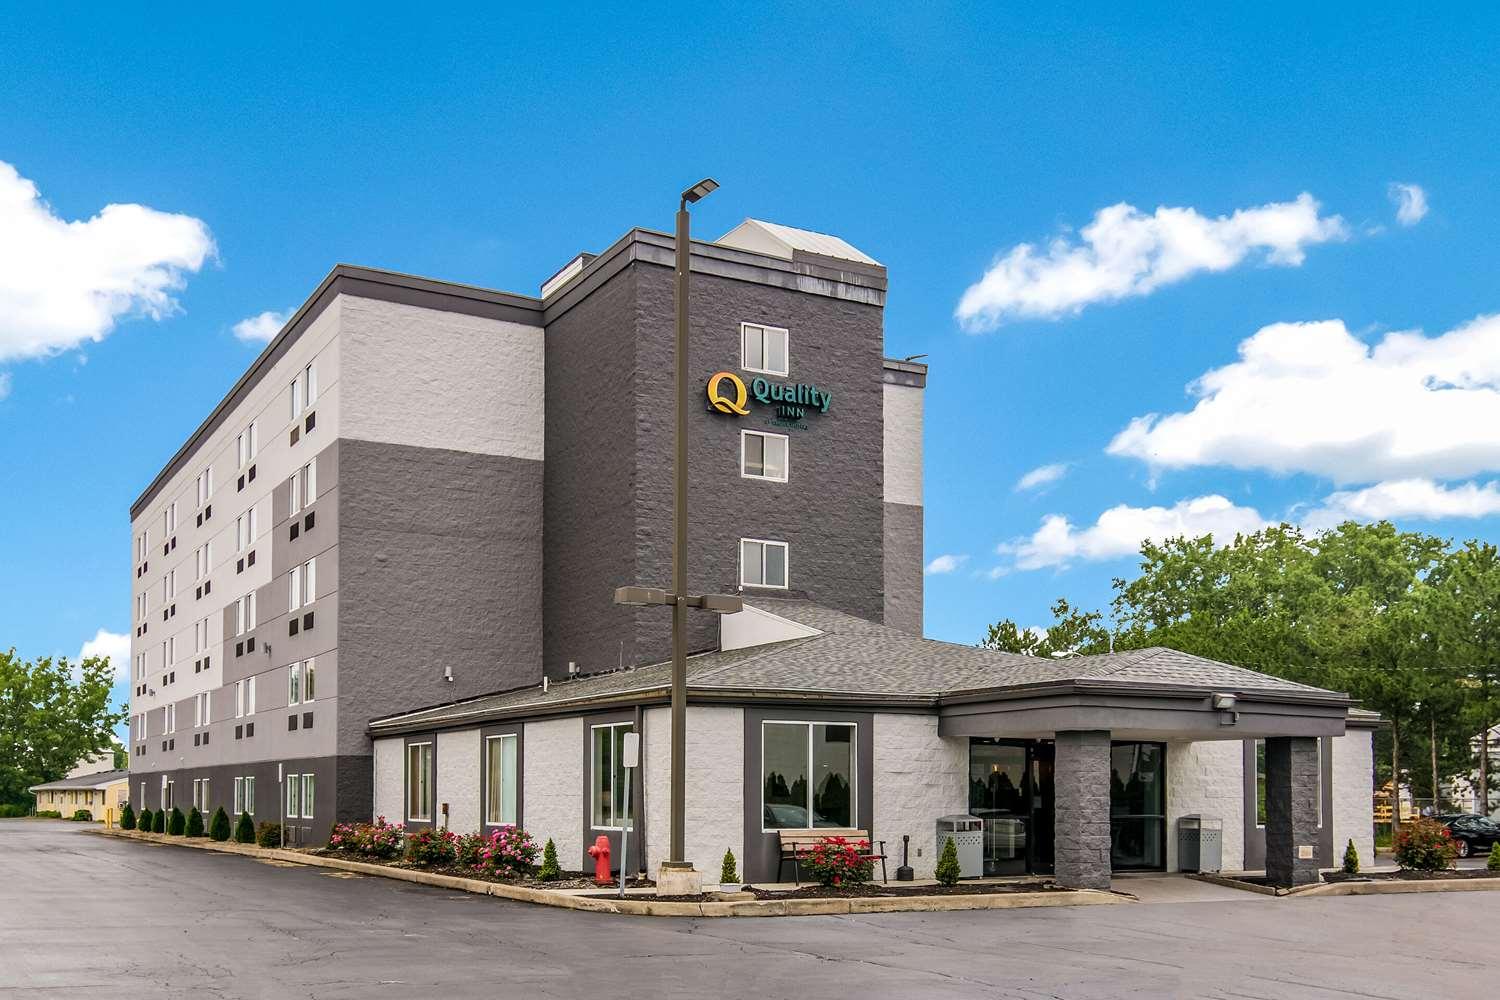 Quality Inn Rochester in Rochester, NY